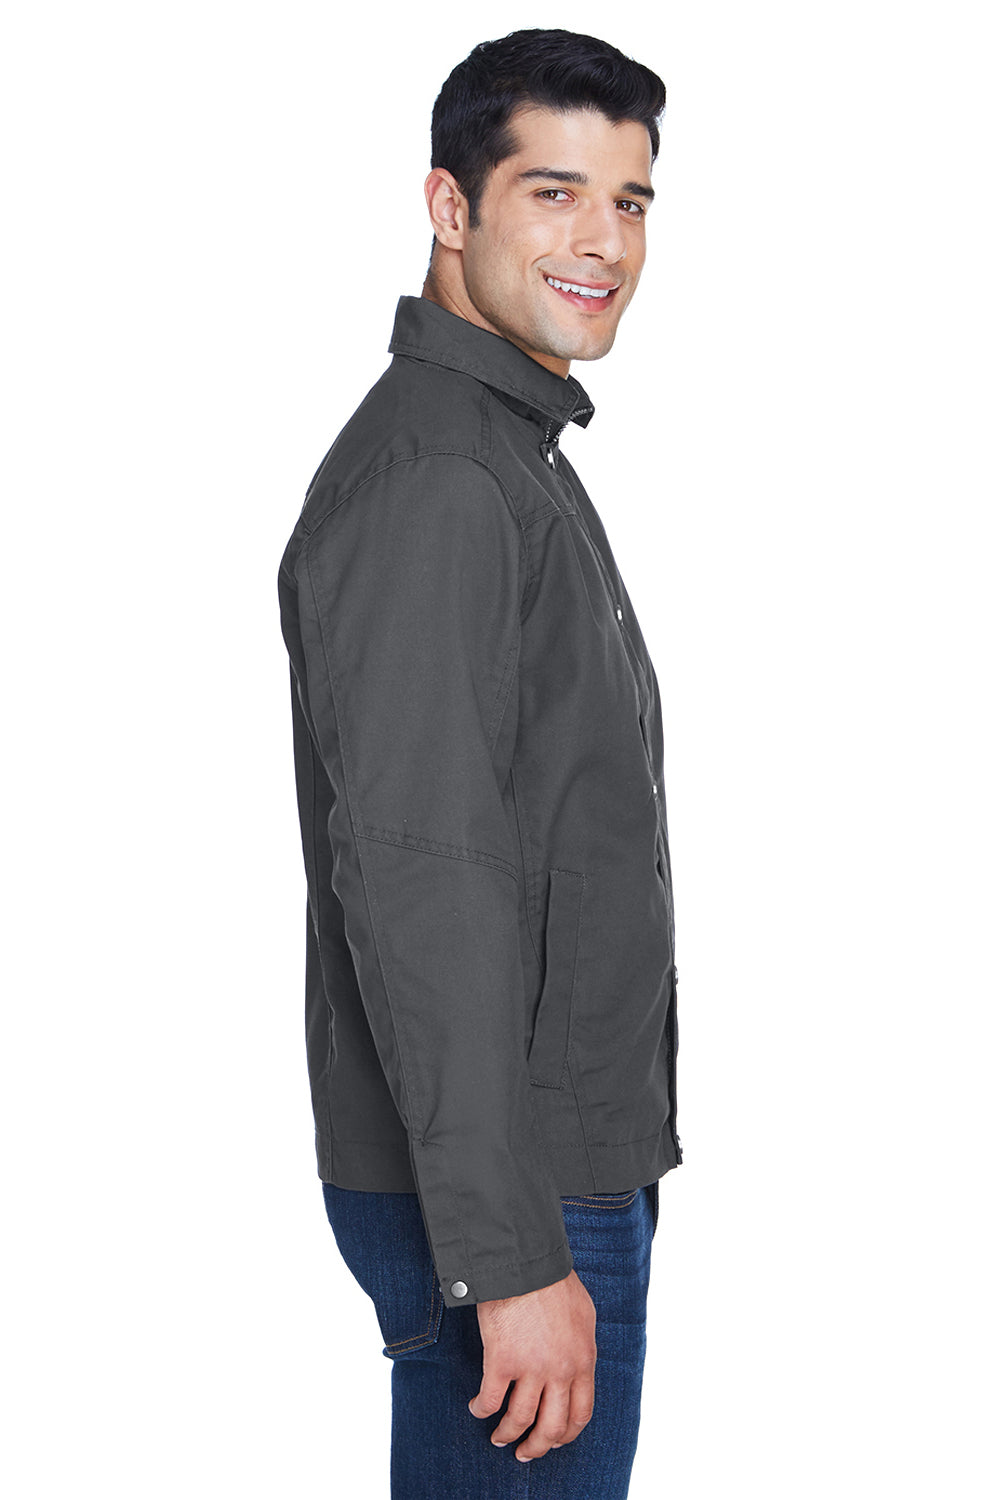 Harriton M705 Mens Auxiliary Water Resistant Canvas Full Zip Jacket Charcoal Grey Side